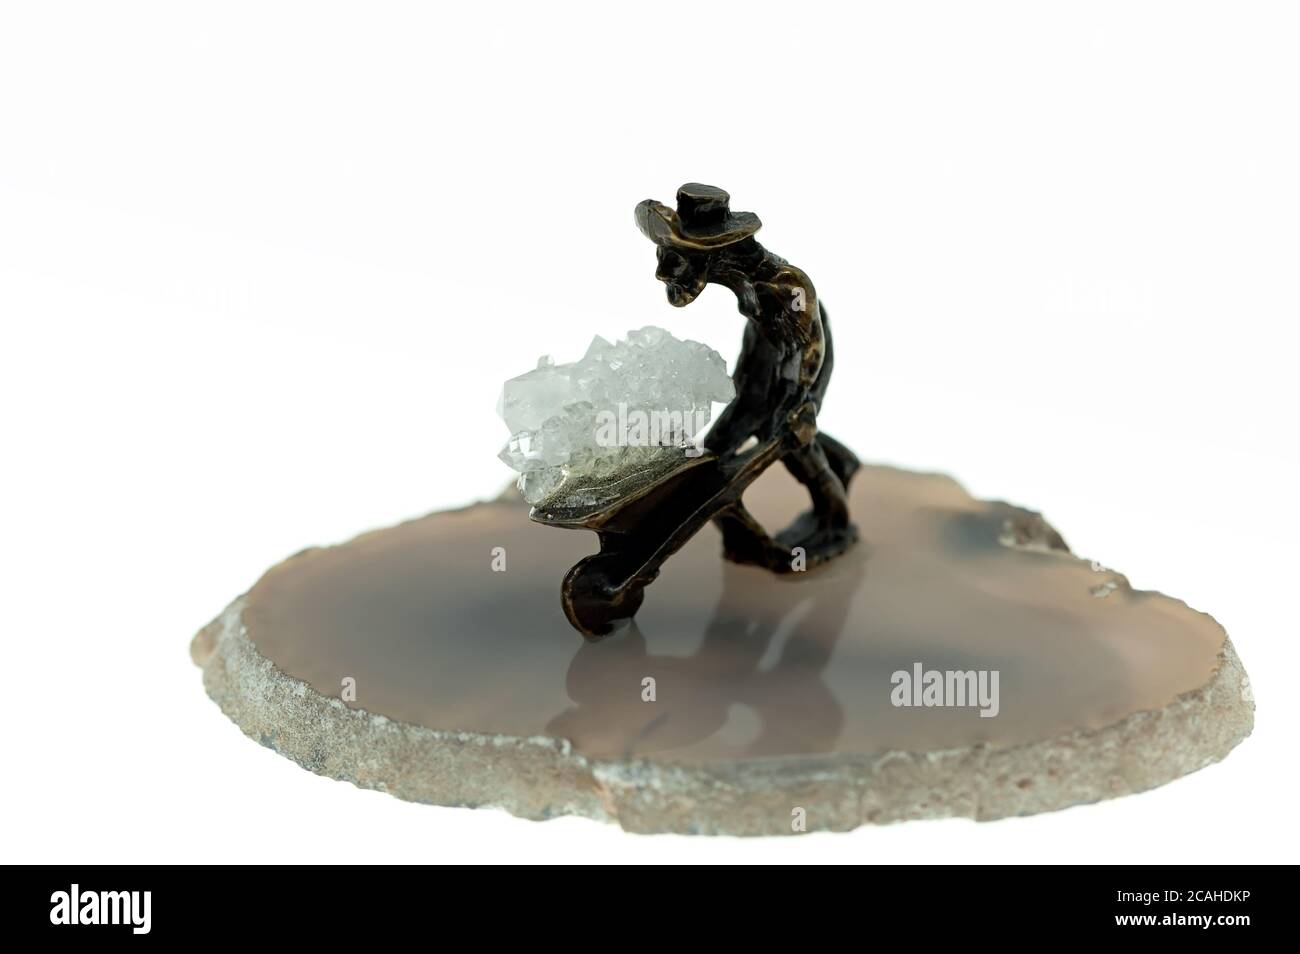 Isolated small metal miner figurine on a stone Stock Photo